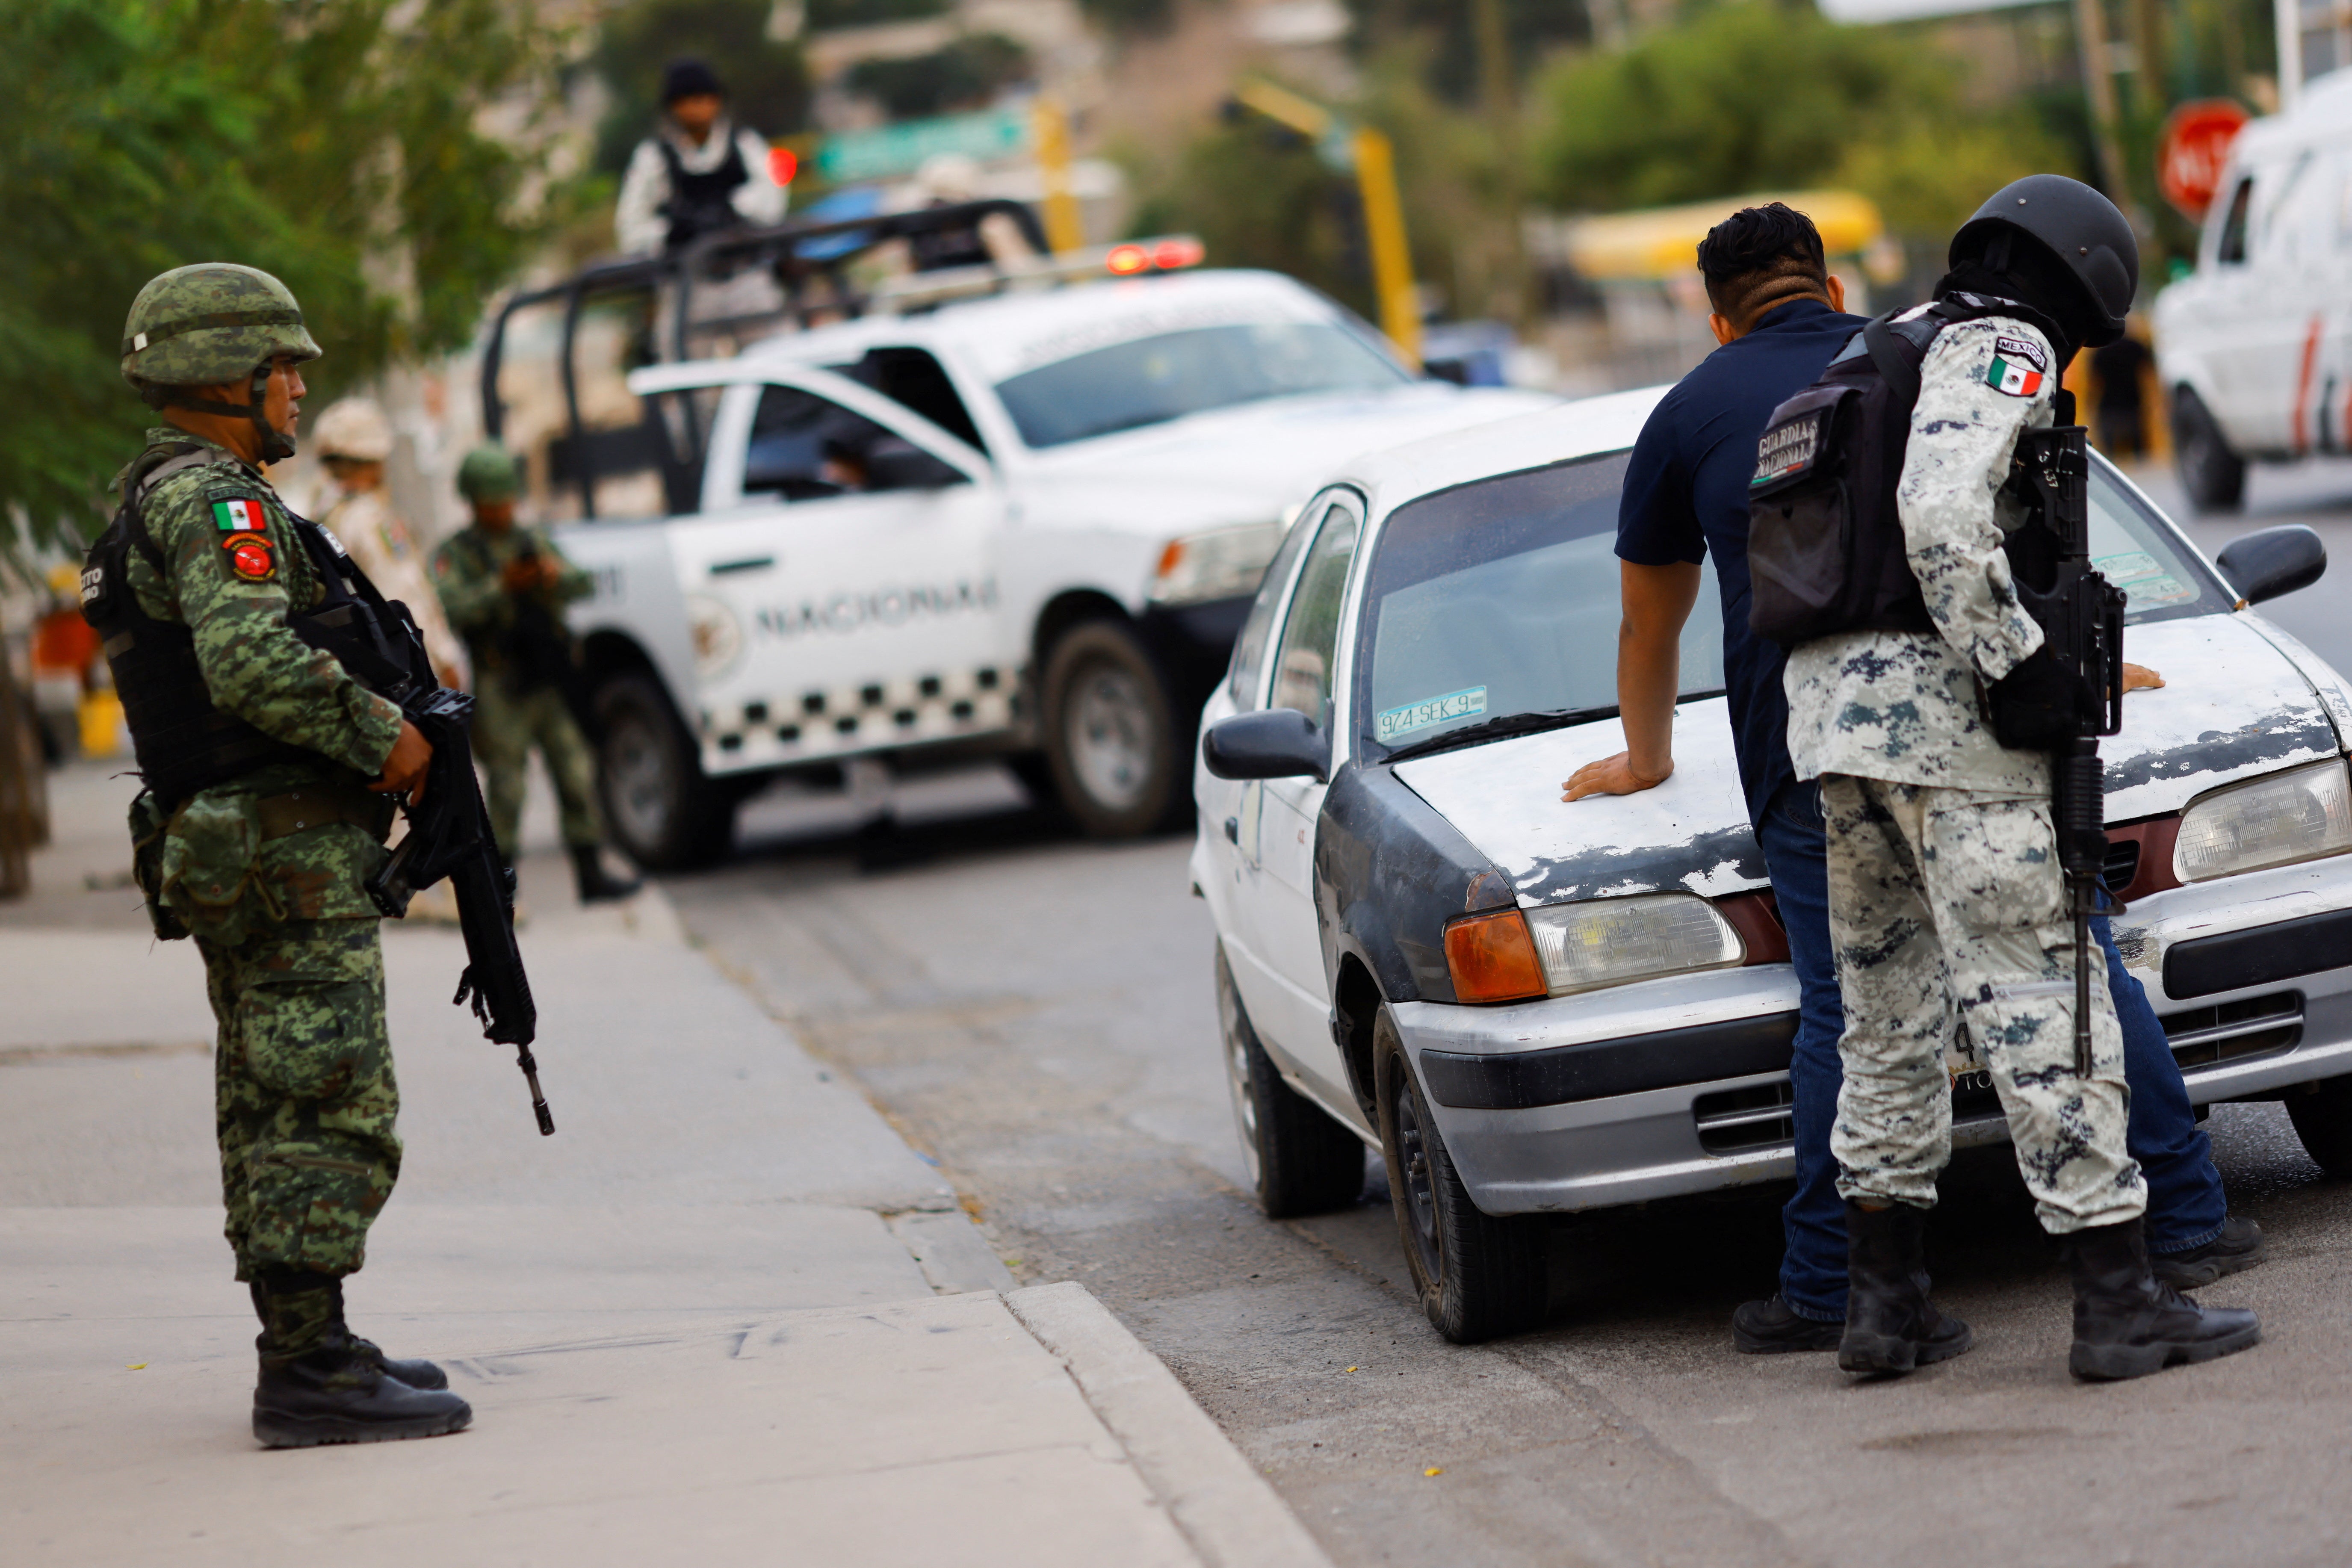 Members of the Mexican Army and National Guard check a car at a military checkpoint, as part of a security operation to reduce violence, in Ciudad Juarez, Mexico, on 16 August 2022